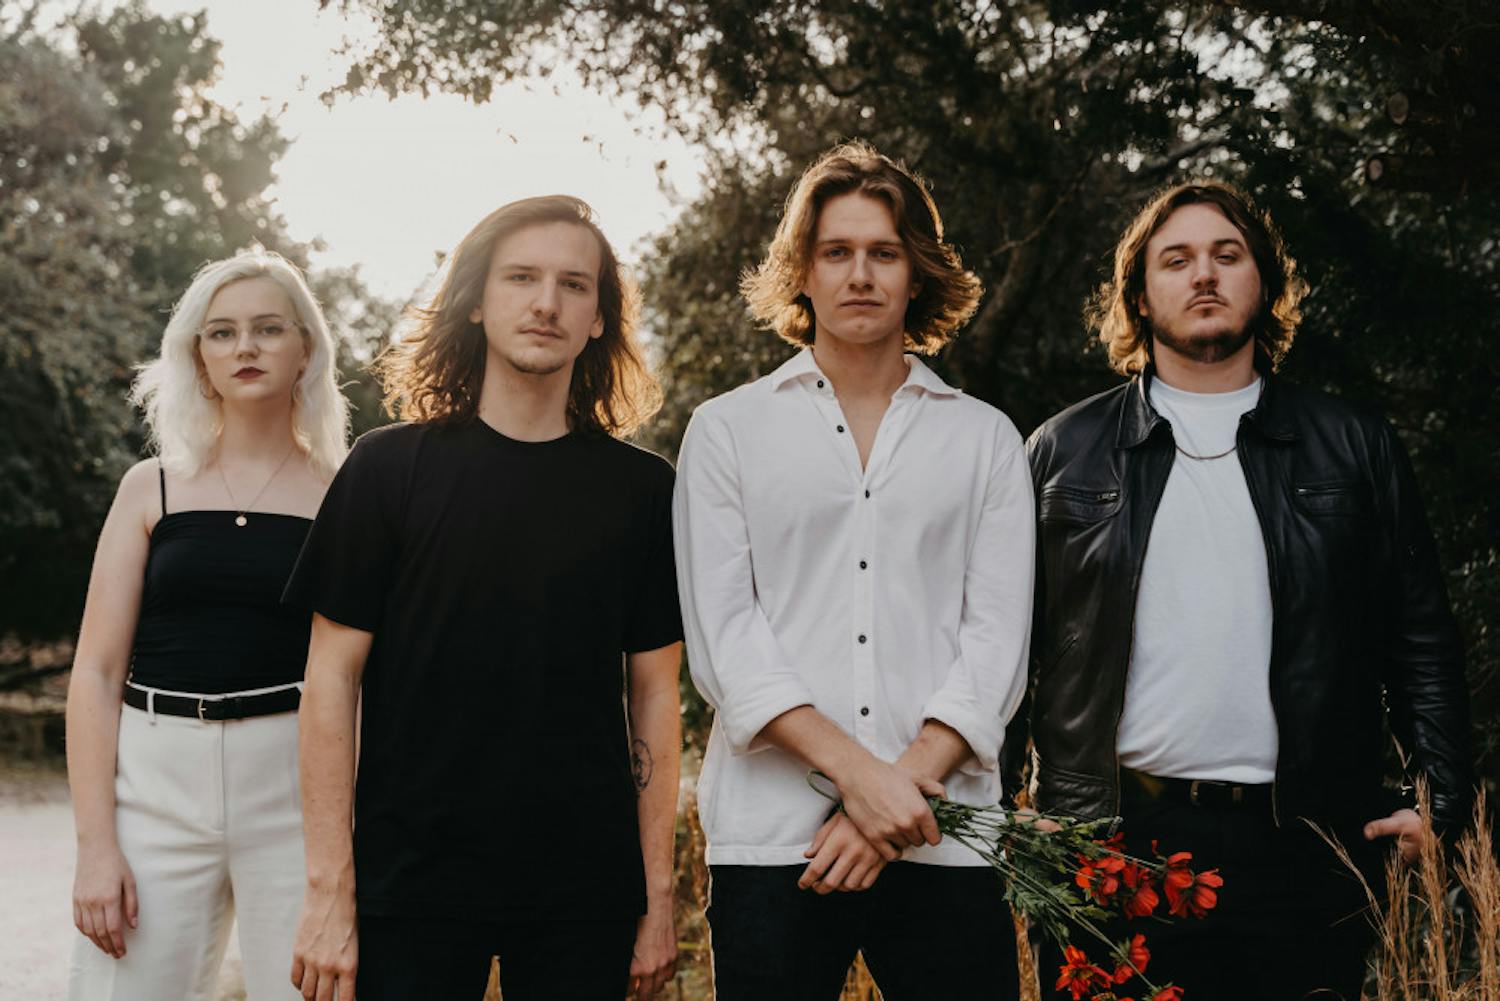 (L-R) Madeline Jarman (bass), Tristan Duncan (guitar), Dillon Basse (vocals) and Adrian Walker (drums) of flipturn will be kickstarting their 2020 "Something You Needed" tour at High Dive this Saturday. 